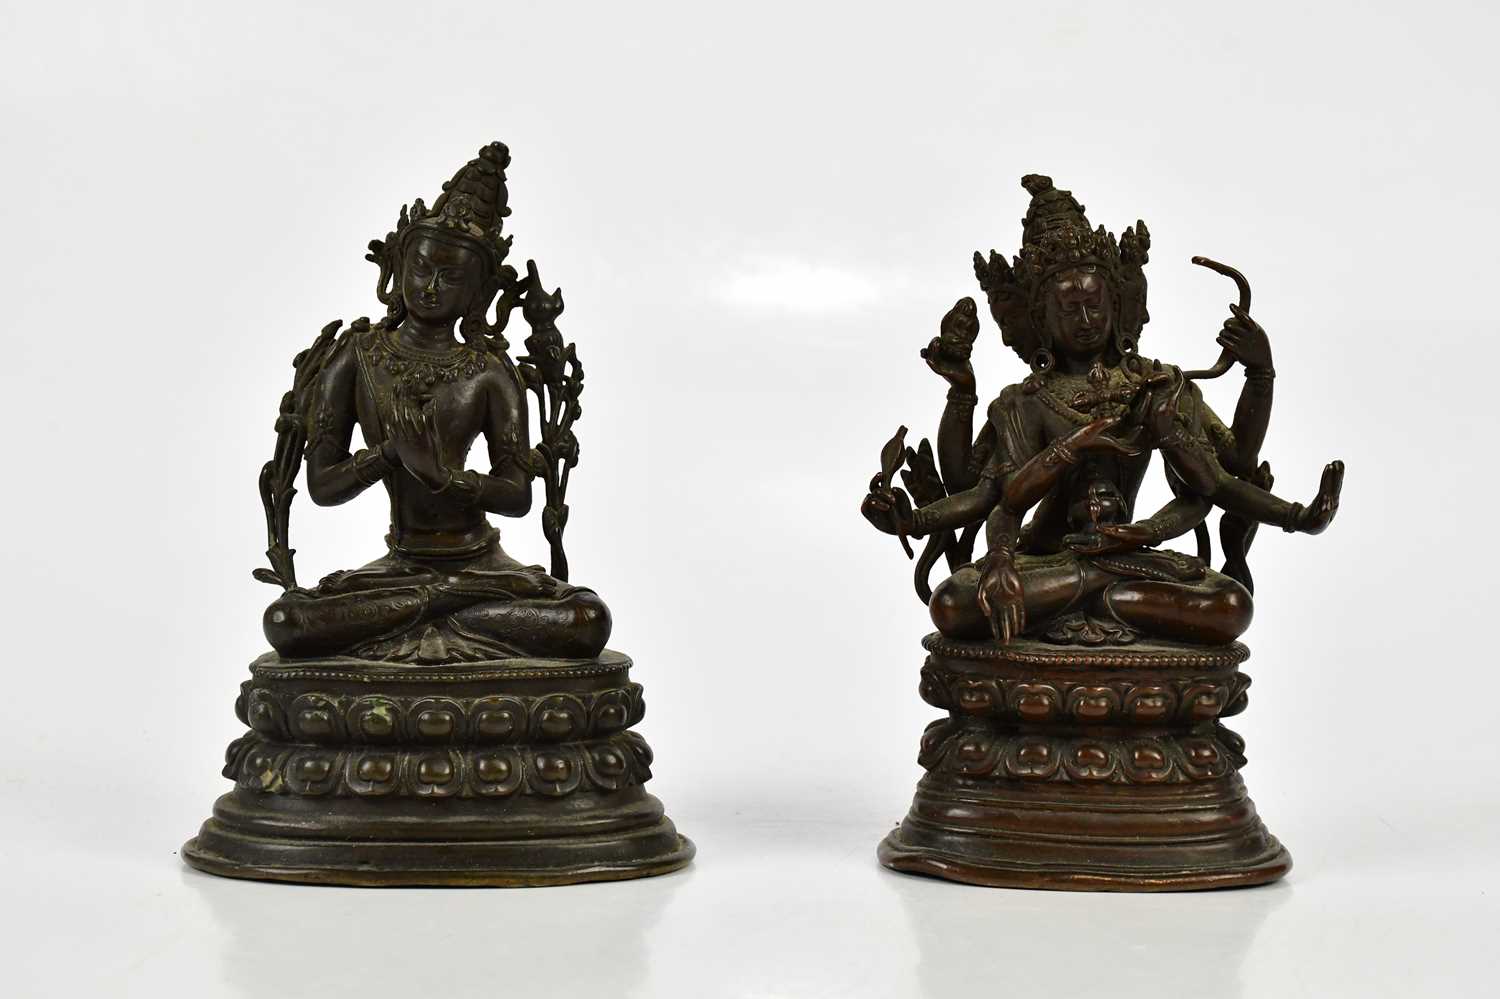 A Chinese bronze figure of Jnana Dakini, with six arms, on lotus base, height 14cm, with a similar